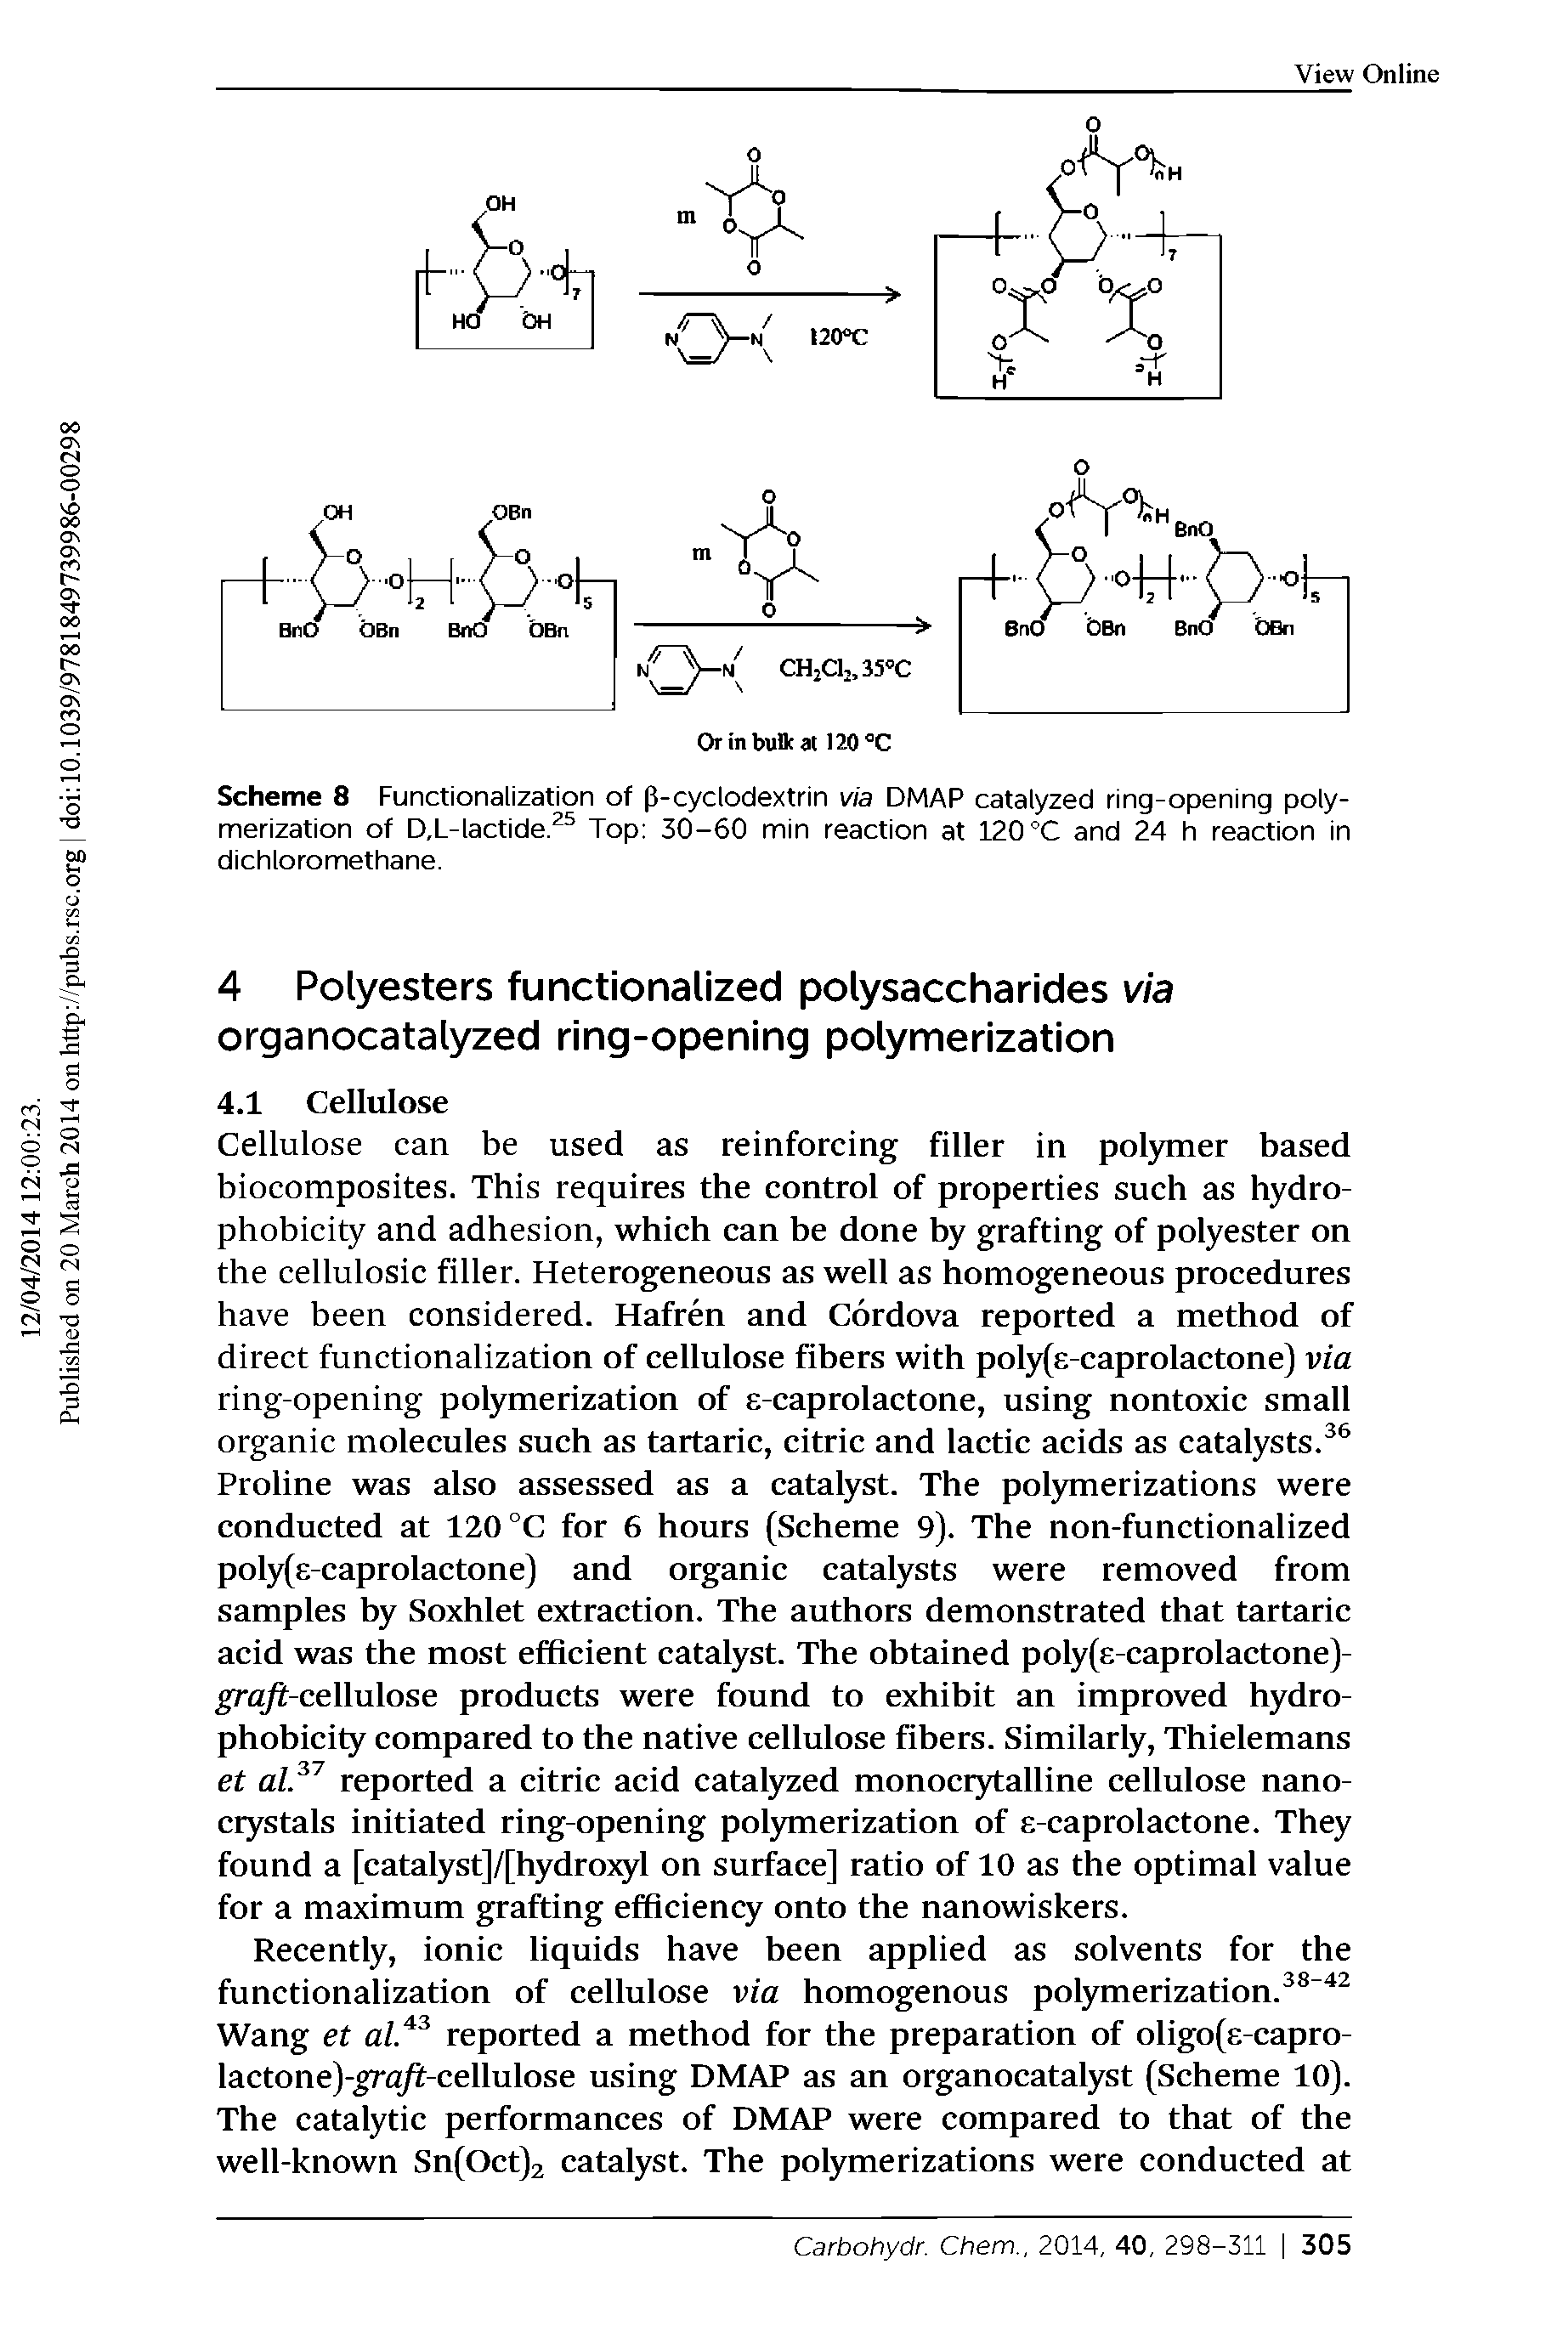 Scheme 8 Functionalization of p-cyclodextrin v a DMAP catalyzed ring-opening polymerization of D,L-lactide. Top 30-60 min reaction at 120 °C and 24 h reaction in dichloromethane.